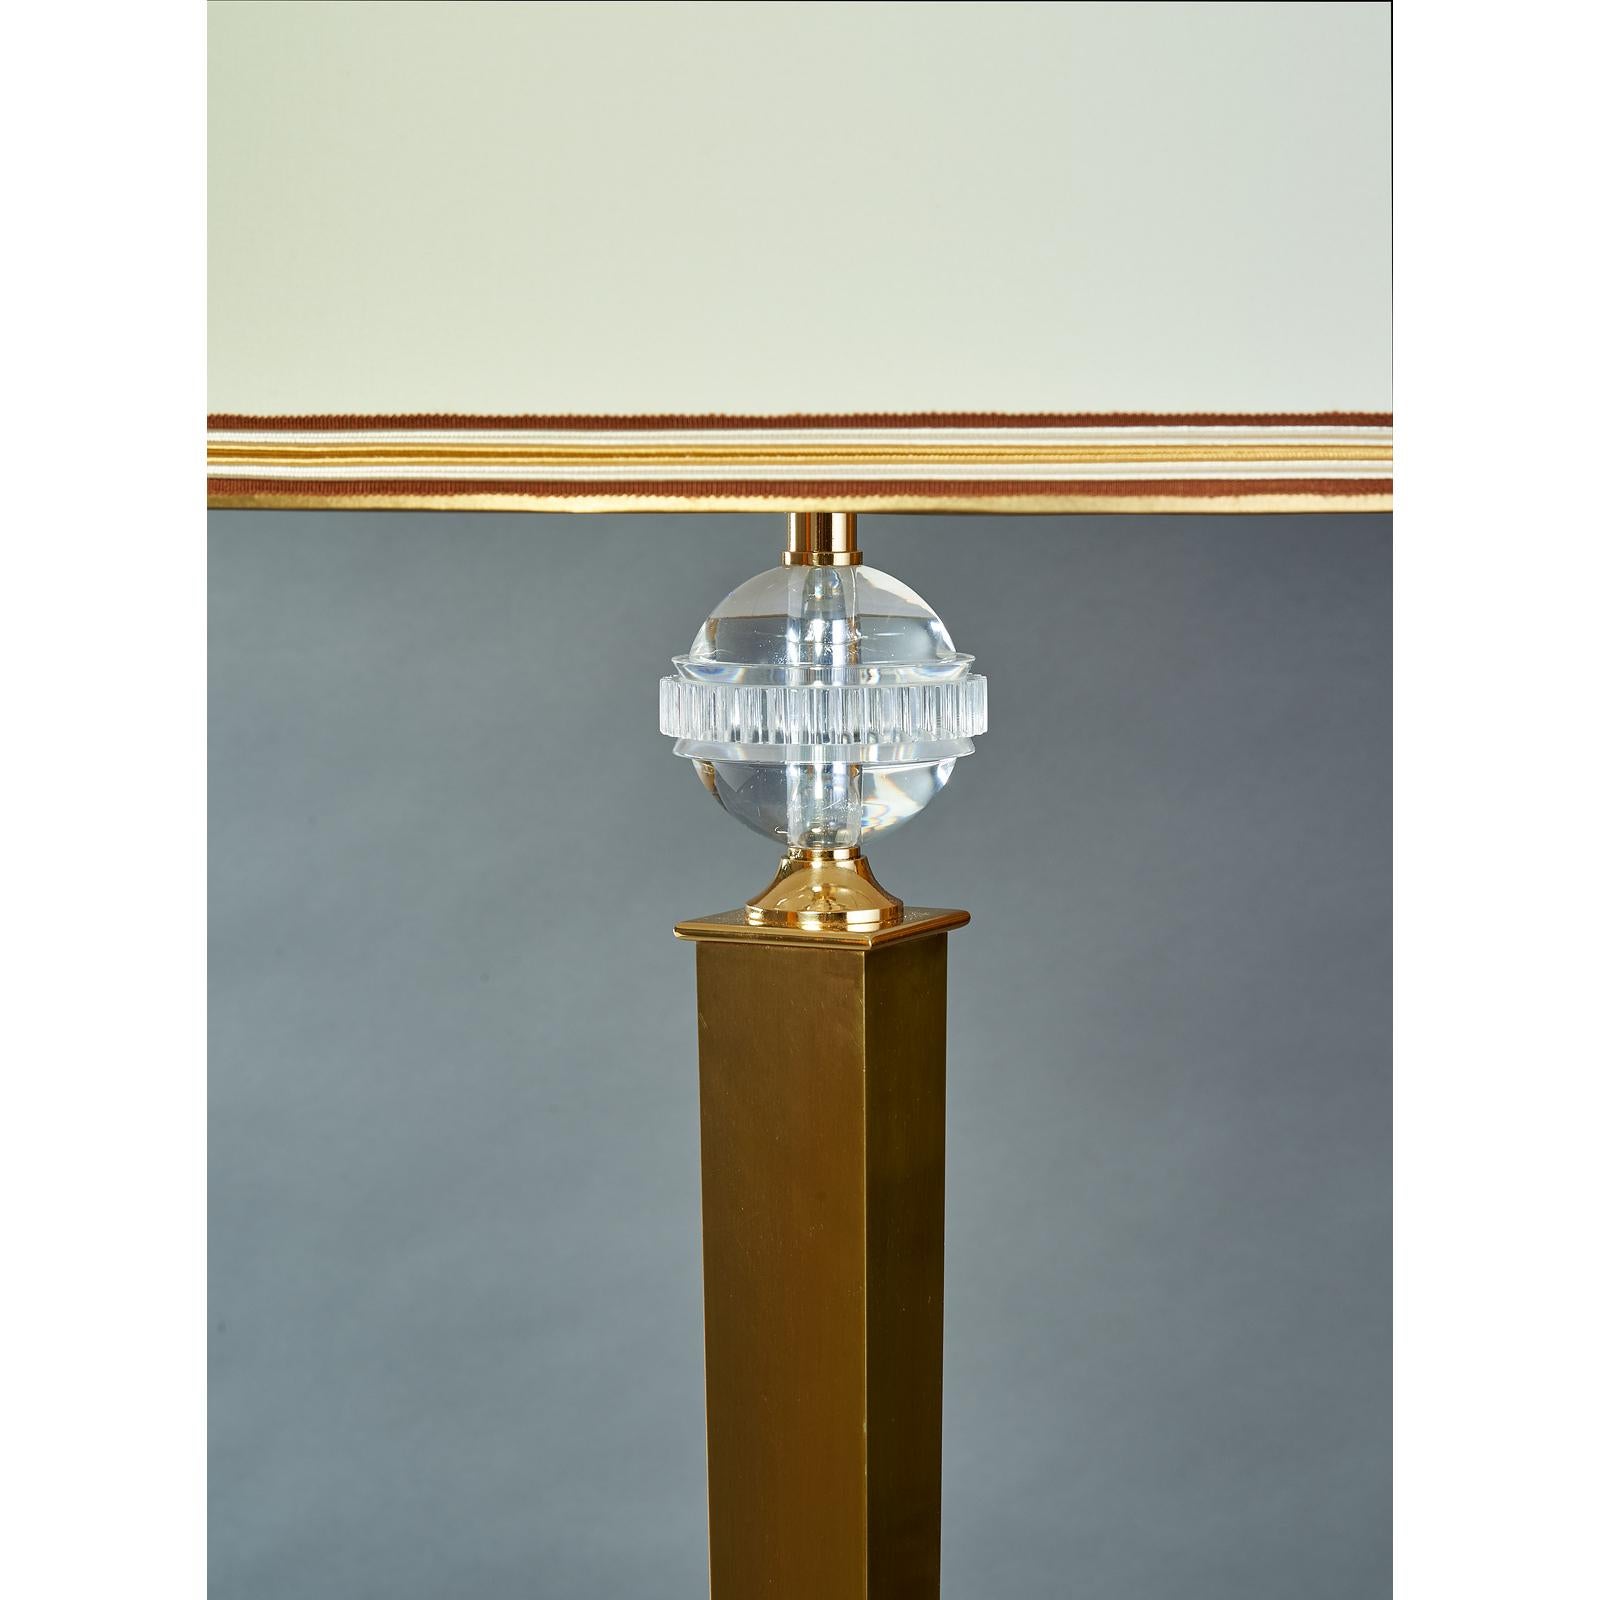 DOMINIQUE
Andre Domin (1883-1962) & Marcel Genevriere (1885-1967).
Exquisite neoclassical floor lamp, with sculptural oxidized bronze finish and polished brass mounts, with sharply tapered shaft and belted perspex globe ornament, France,